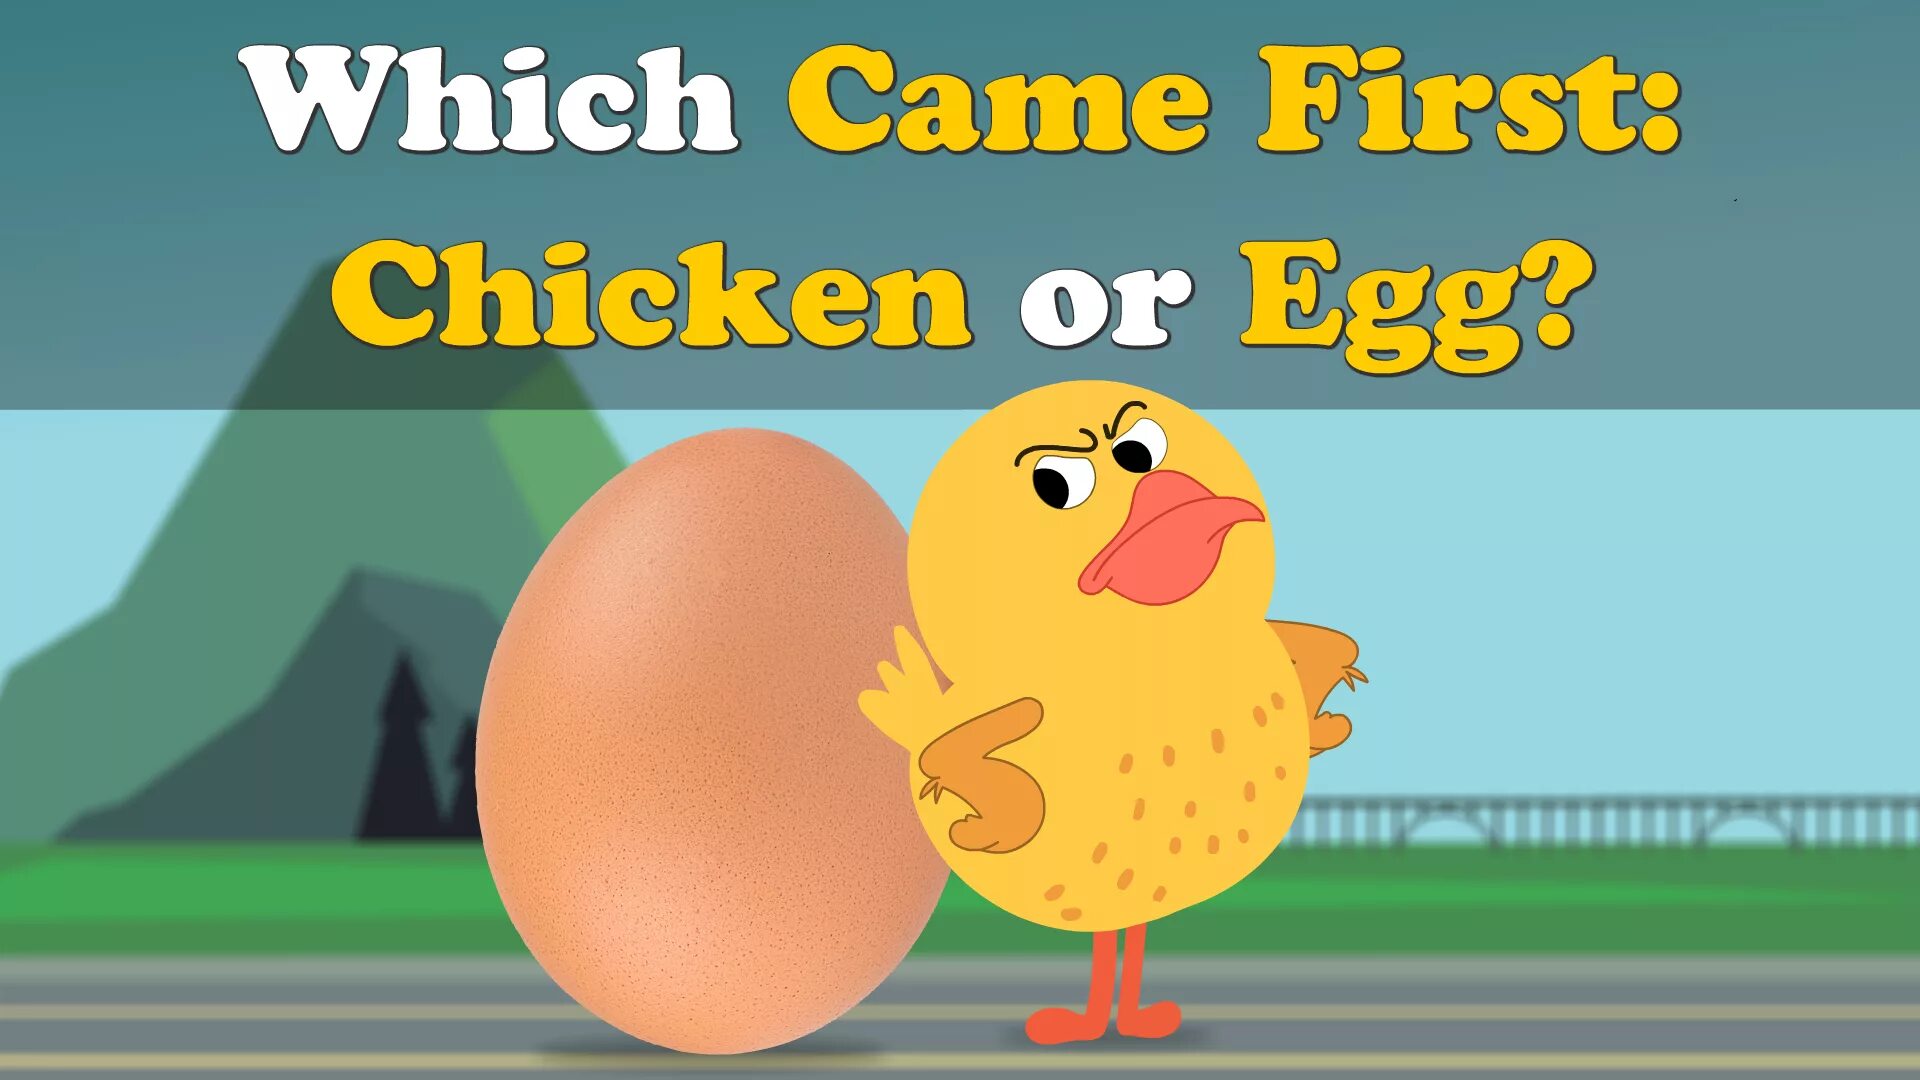 Chick 1. Who came first Chicken or Egg. Which came first the Chicken or the Egg. Which came first, the Chicken or the Egg? Картинка. Chicken or Egg.